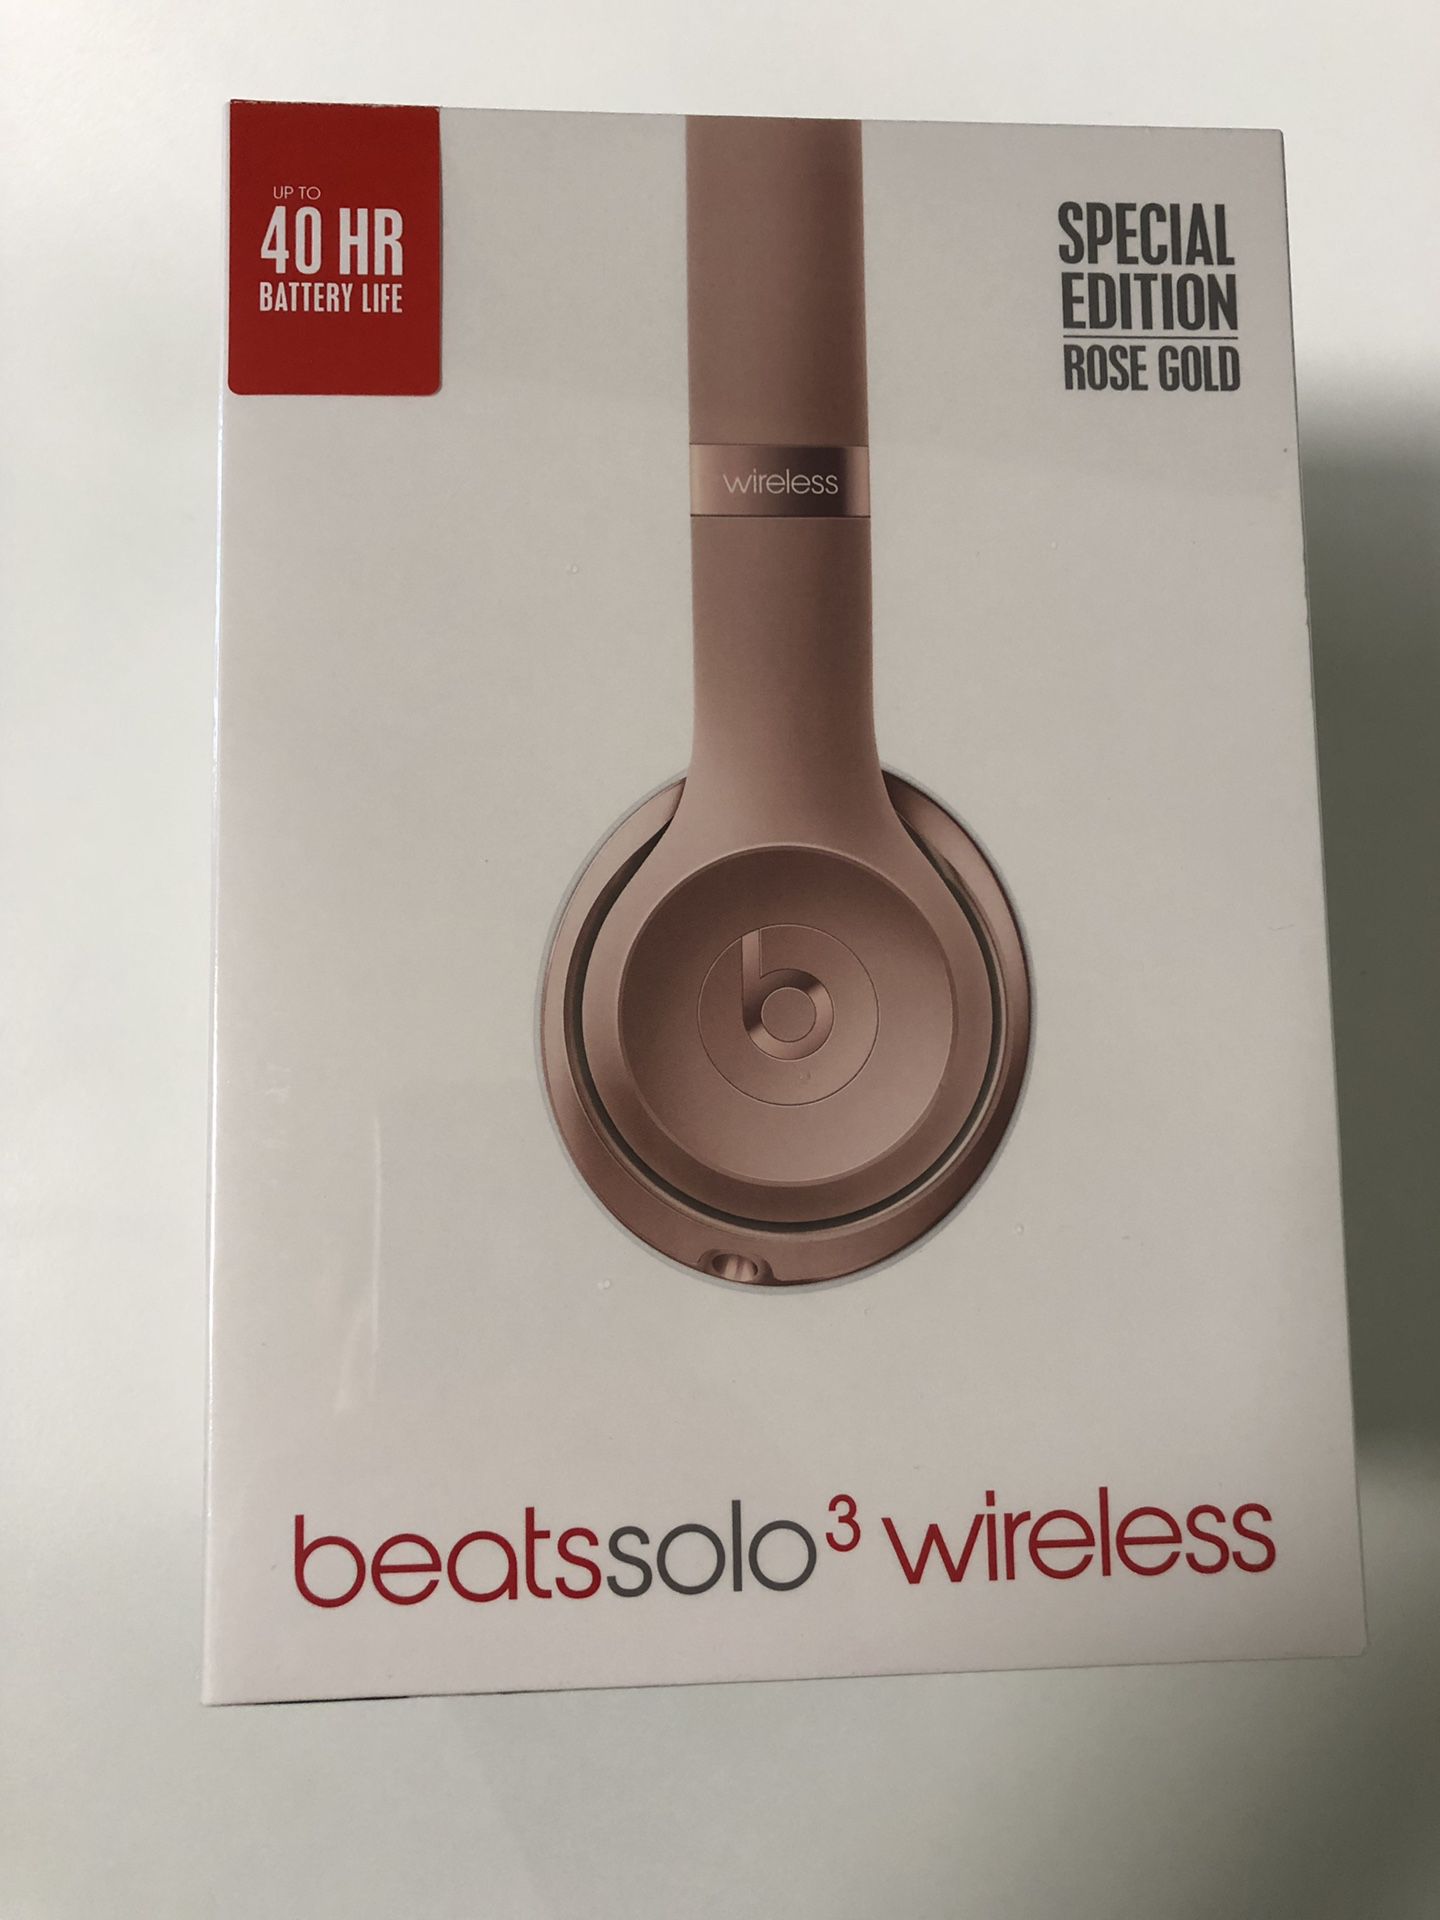 Beats Solo 3 Wireless On-ear Headphones, Special Edition Rose Gold